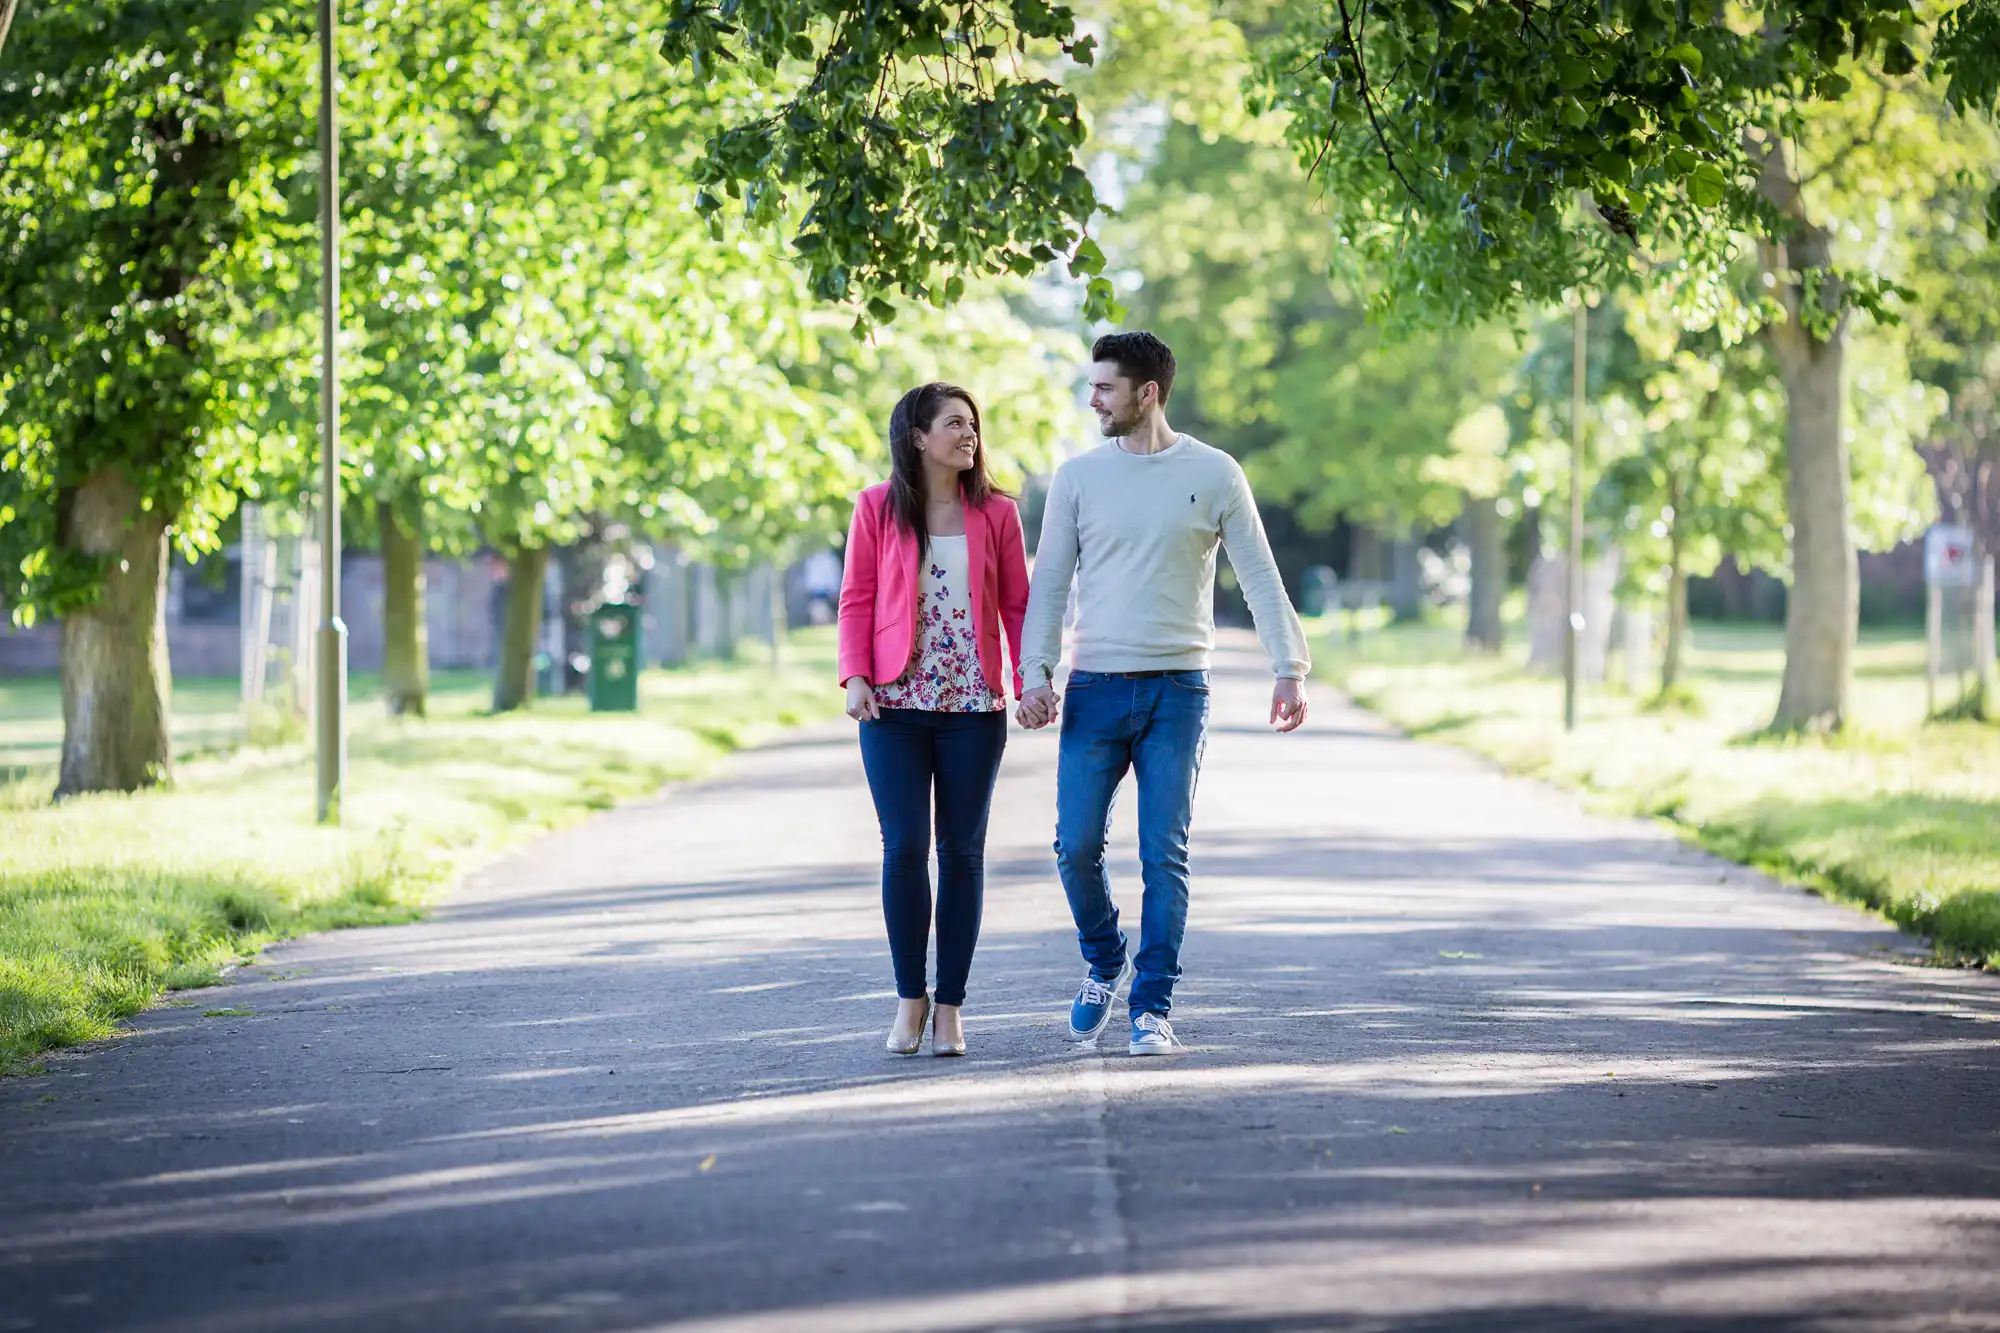 A man and a woman walking and talking on a tree-lined path in a park.